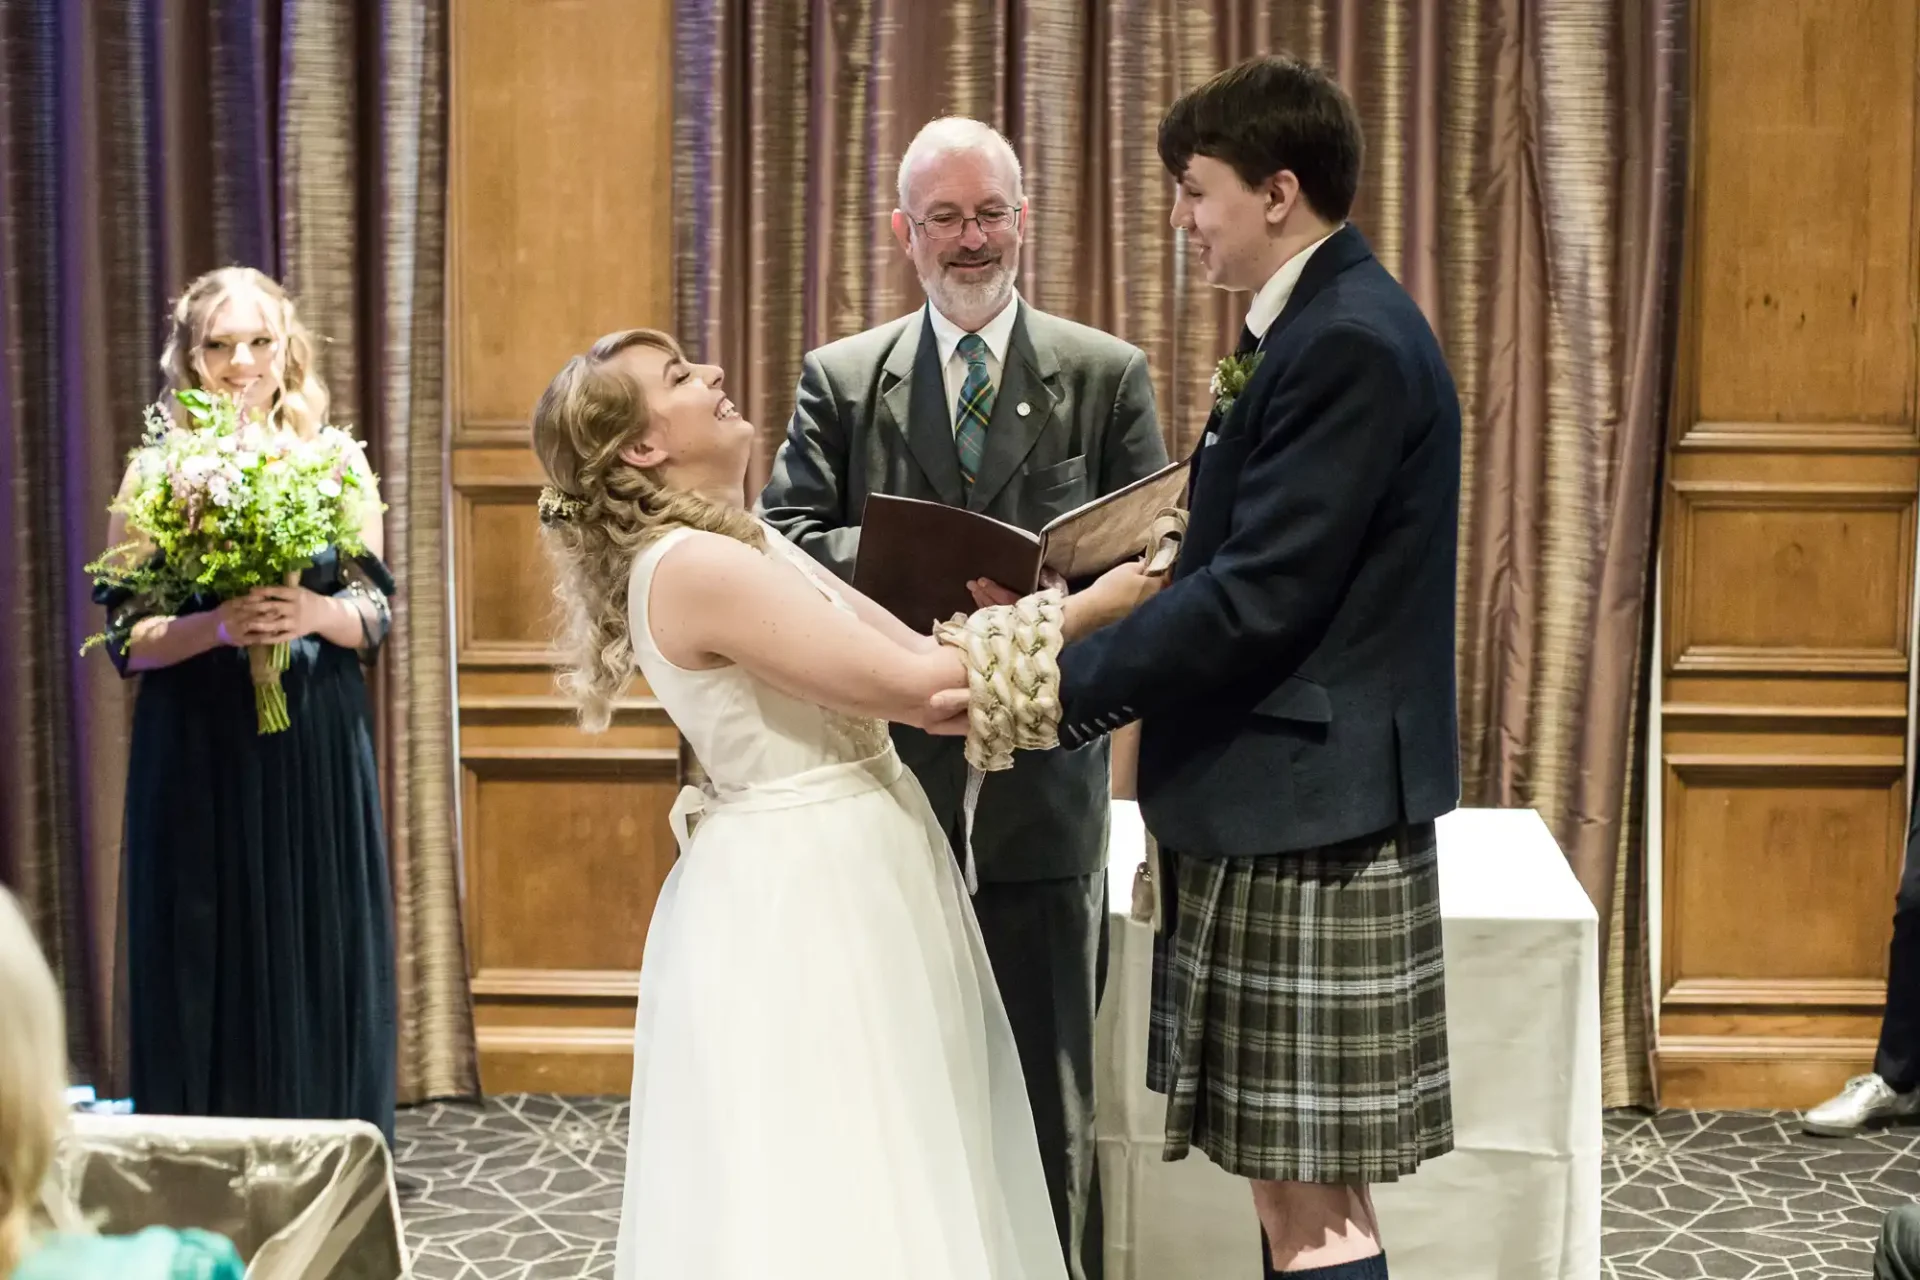 A bride and groom, wearing traditional scottish attire, hold hands during their wedding ceremony, with an officiant smiling behind them and a bridesmaid in the background.